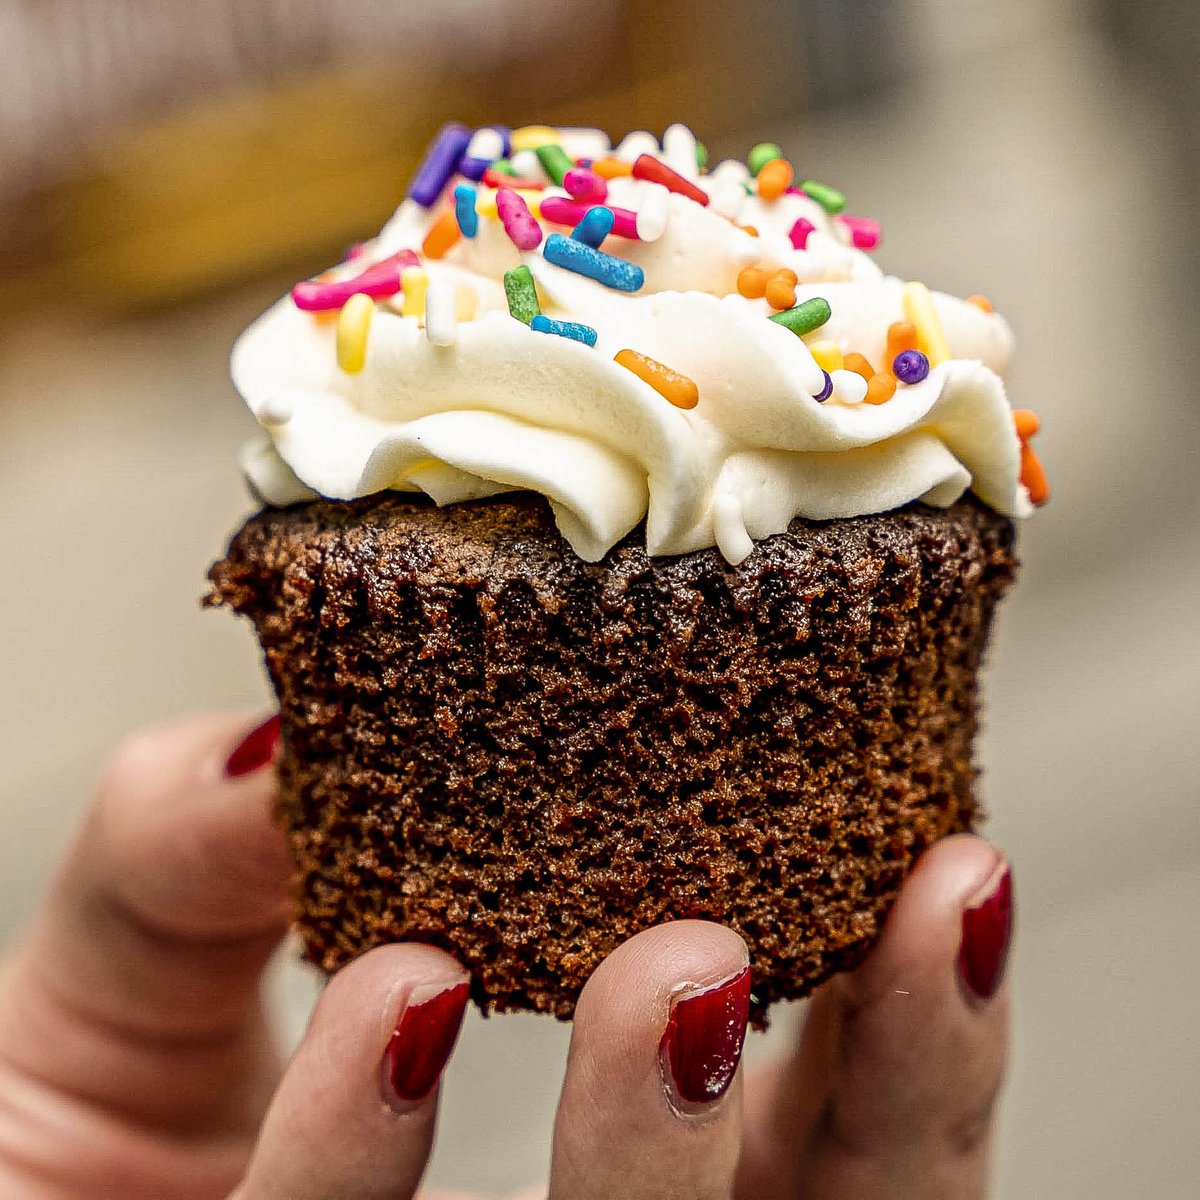 Go on, have a cupcake: You deserve it!! 🧁 #EatFreshPie

#NYCBakery #NYCBakeries #BestofNYC #Pies #PiesofIG #Piestagram #PieLovers #PieLoversOnly #Pie #PiesForLife #Baking #Bakers #BestBakers #Cupcake #Cupcakes